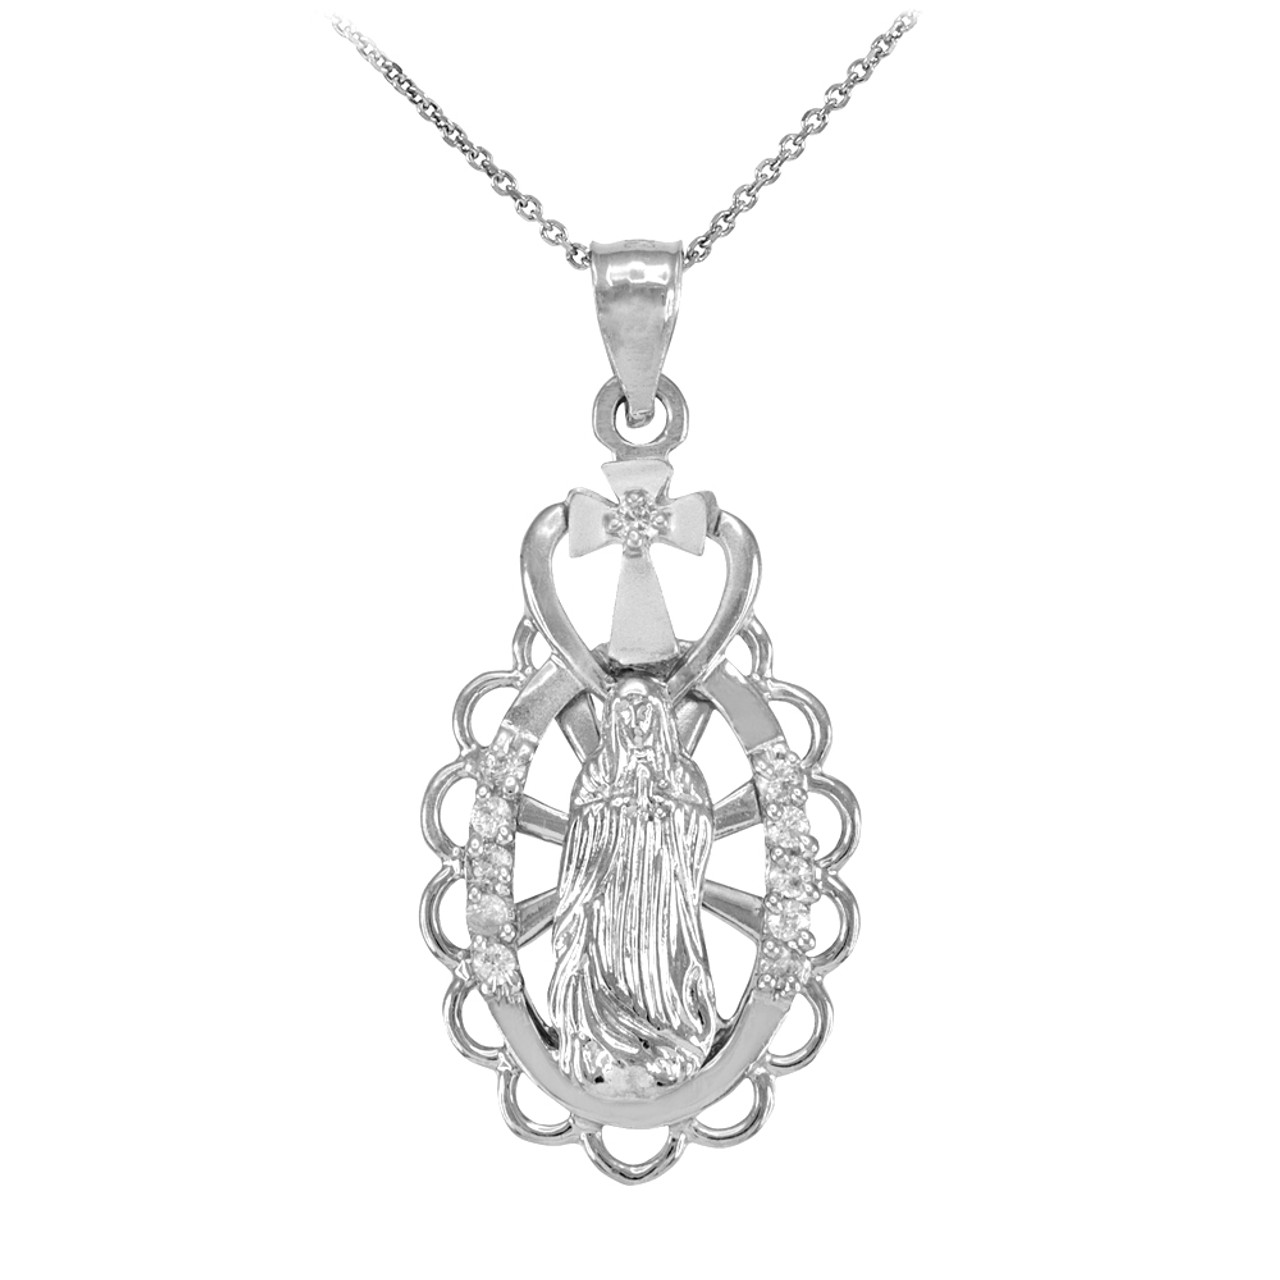 Amazon.com: Virgin Mary Pendant Sterling Silver 925 Mother of God Oval  Jesus Christ Religious Necklace Jewelry : Handmade Products